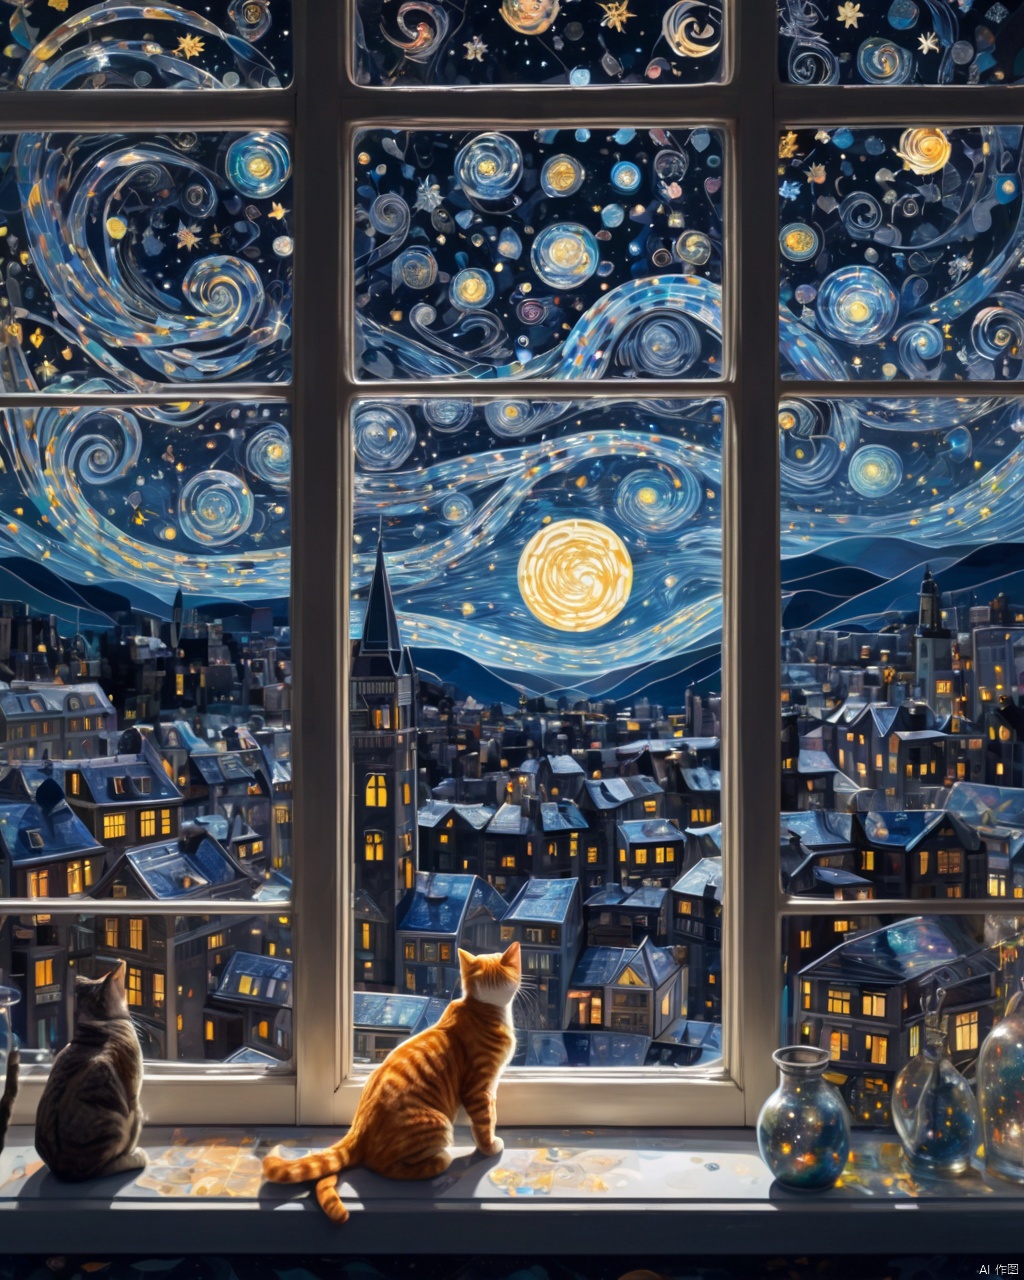  illustration of cat, allure of starry night sky with myriad of twinkling stars, constellations, Milky Way, window art, glass painting, transparent designs, colorful patterns, light-filled displays, creative installations, temporary creations